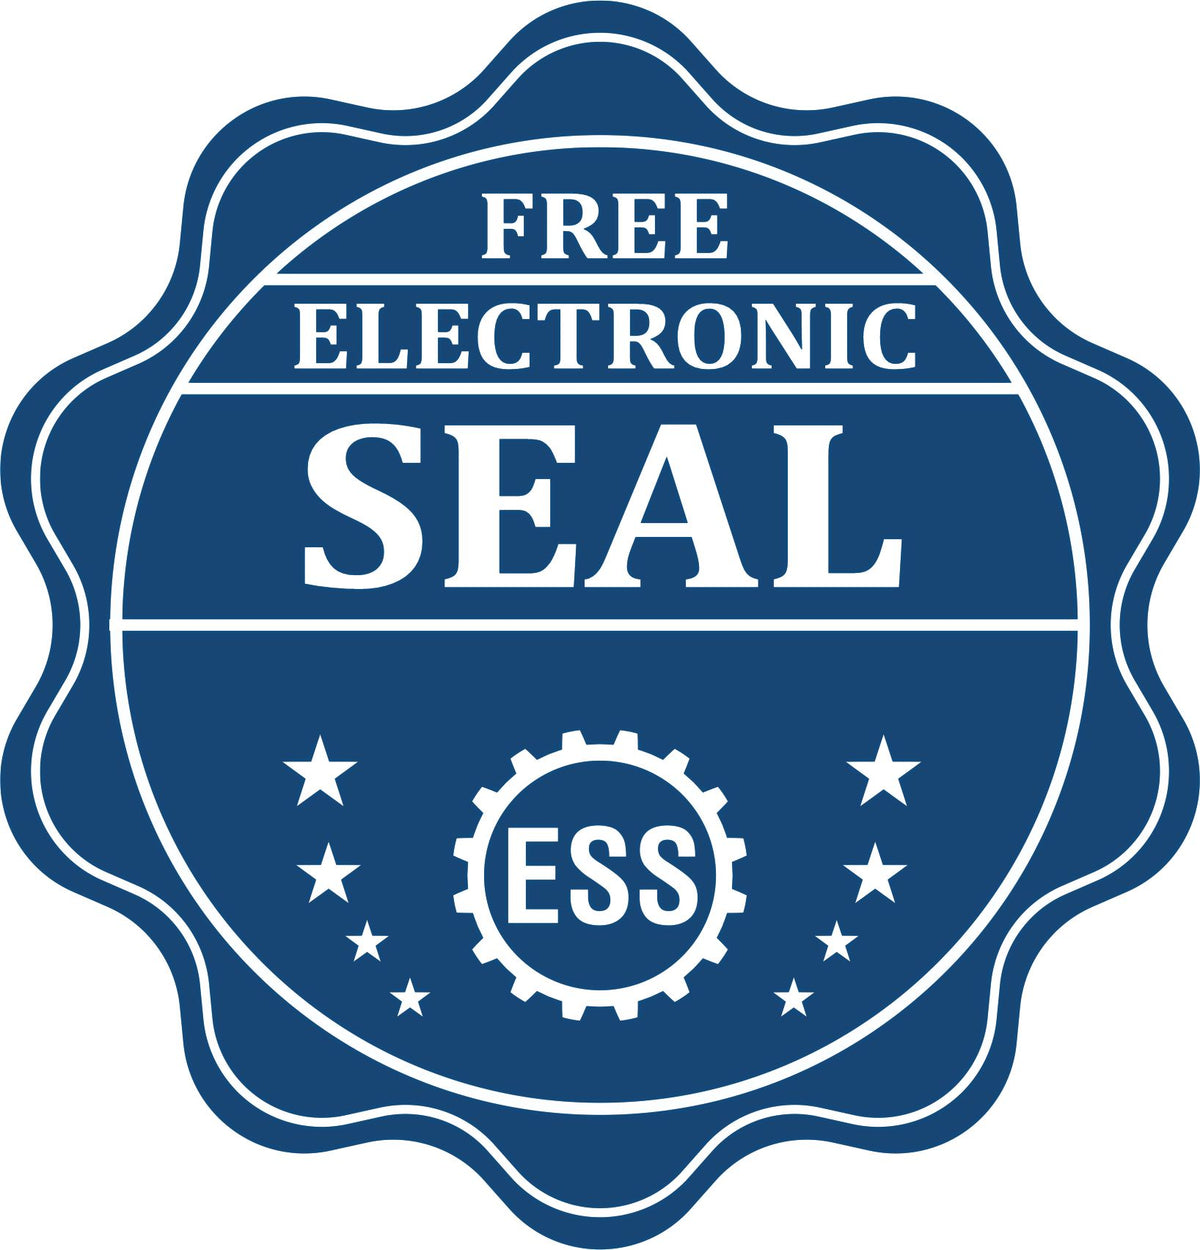 A badge showing a free electronic seal for the Gift Montana Engineer Seal with stars and the ESS gear on the emblem.